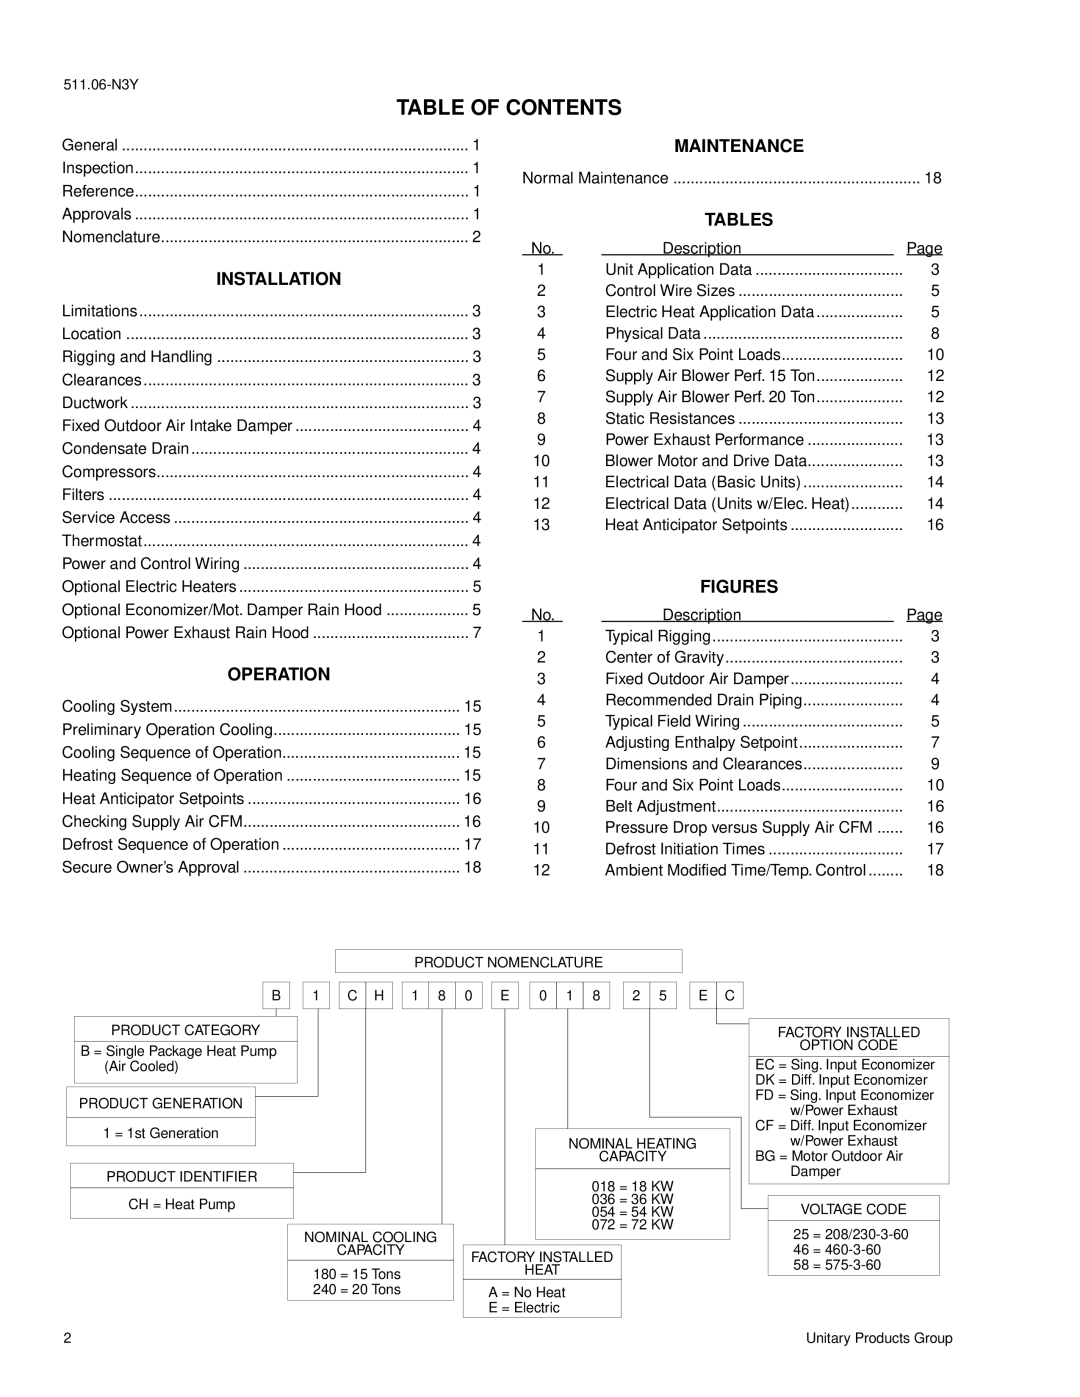 York B1CH180, B1CH240 installation instructions Table Of Contents, Installation, Operation, Maintenance, Tables, Figures 